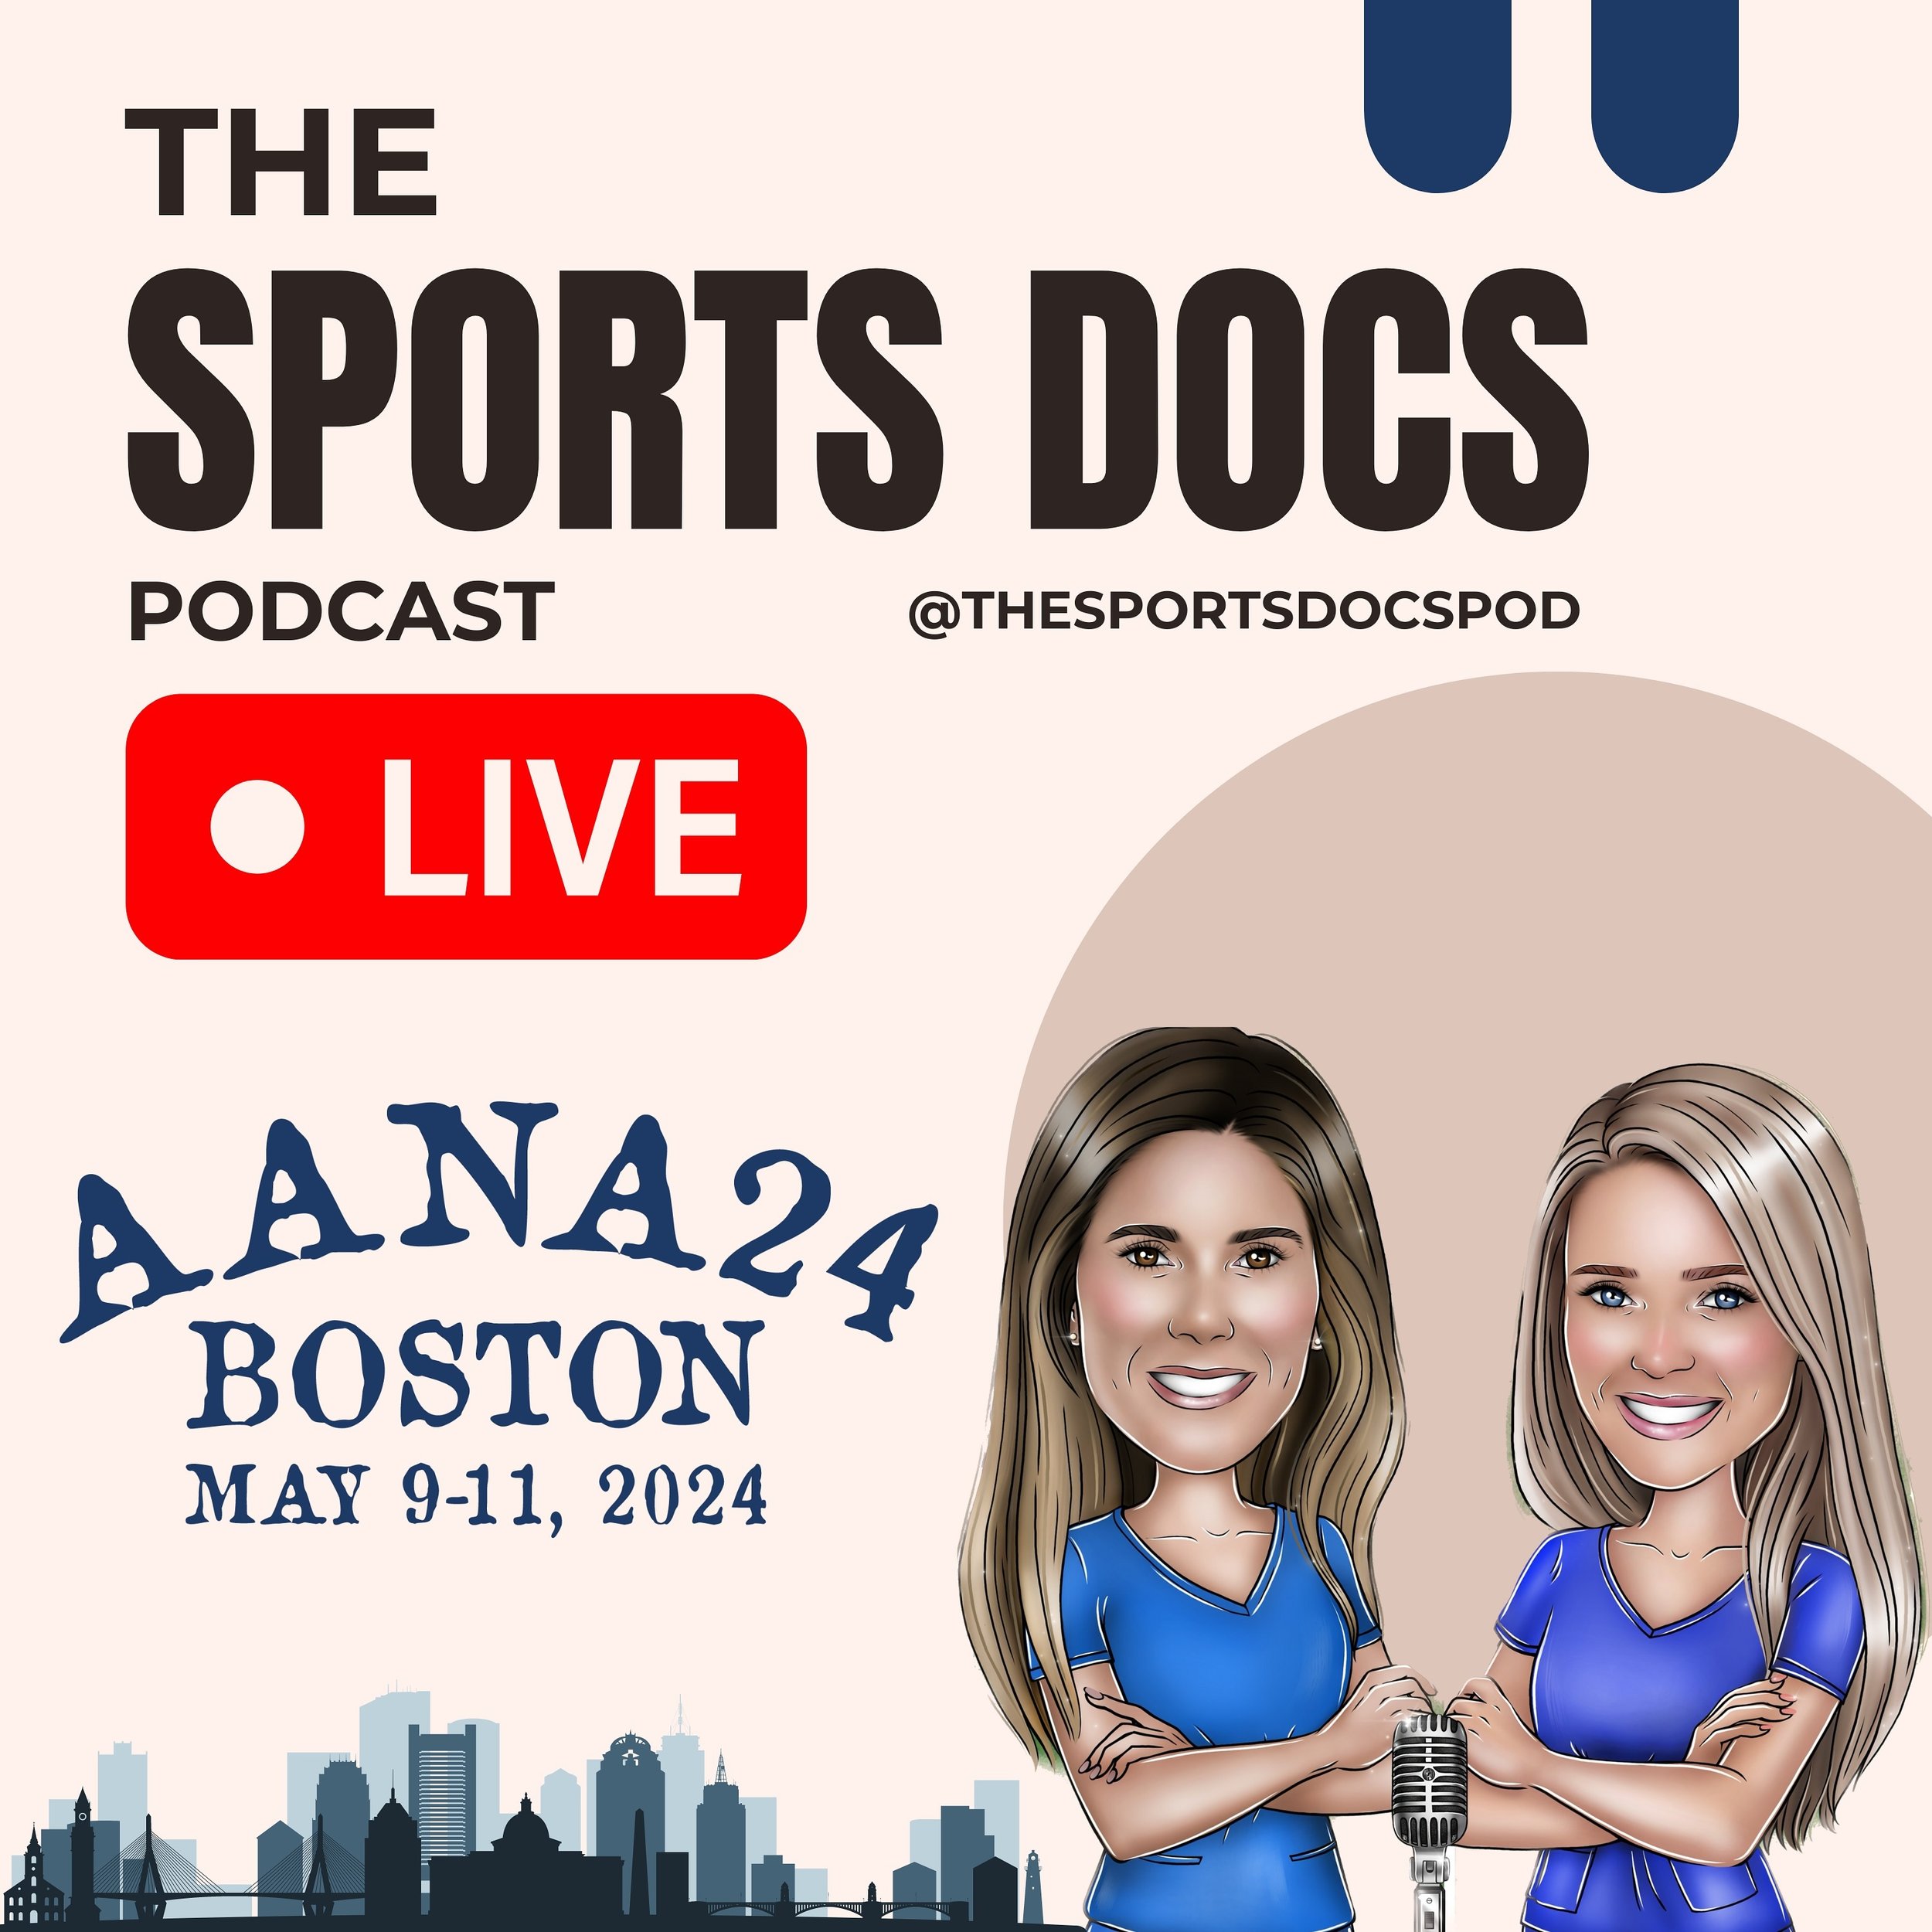 ✨ NEW episode is LIVE! ✨

We&rsquo;re coming to you live from the Arthroscopy Association of North America&rsquo;s Annual Meeting held last week in Boston! 

We discuss some hot topics from this year&rsquo;s @aanaorg meeting, including the addition o